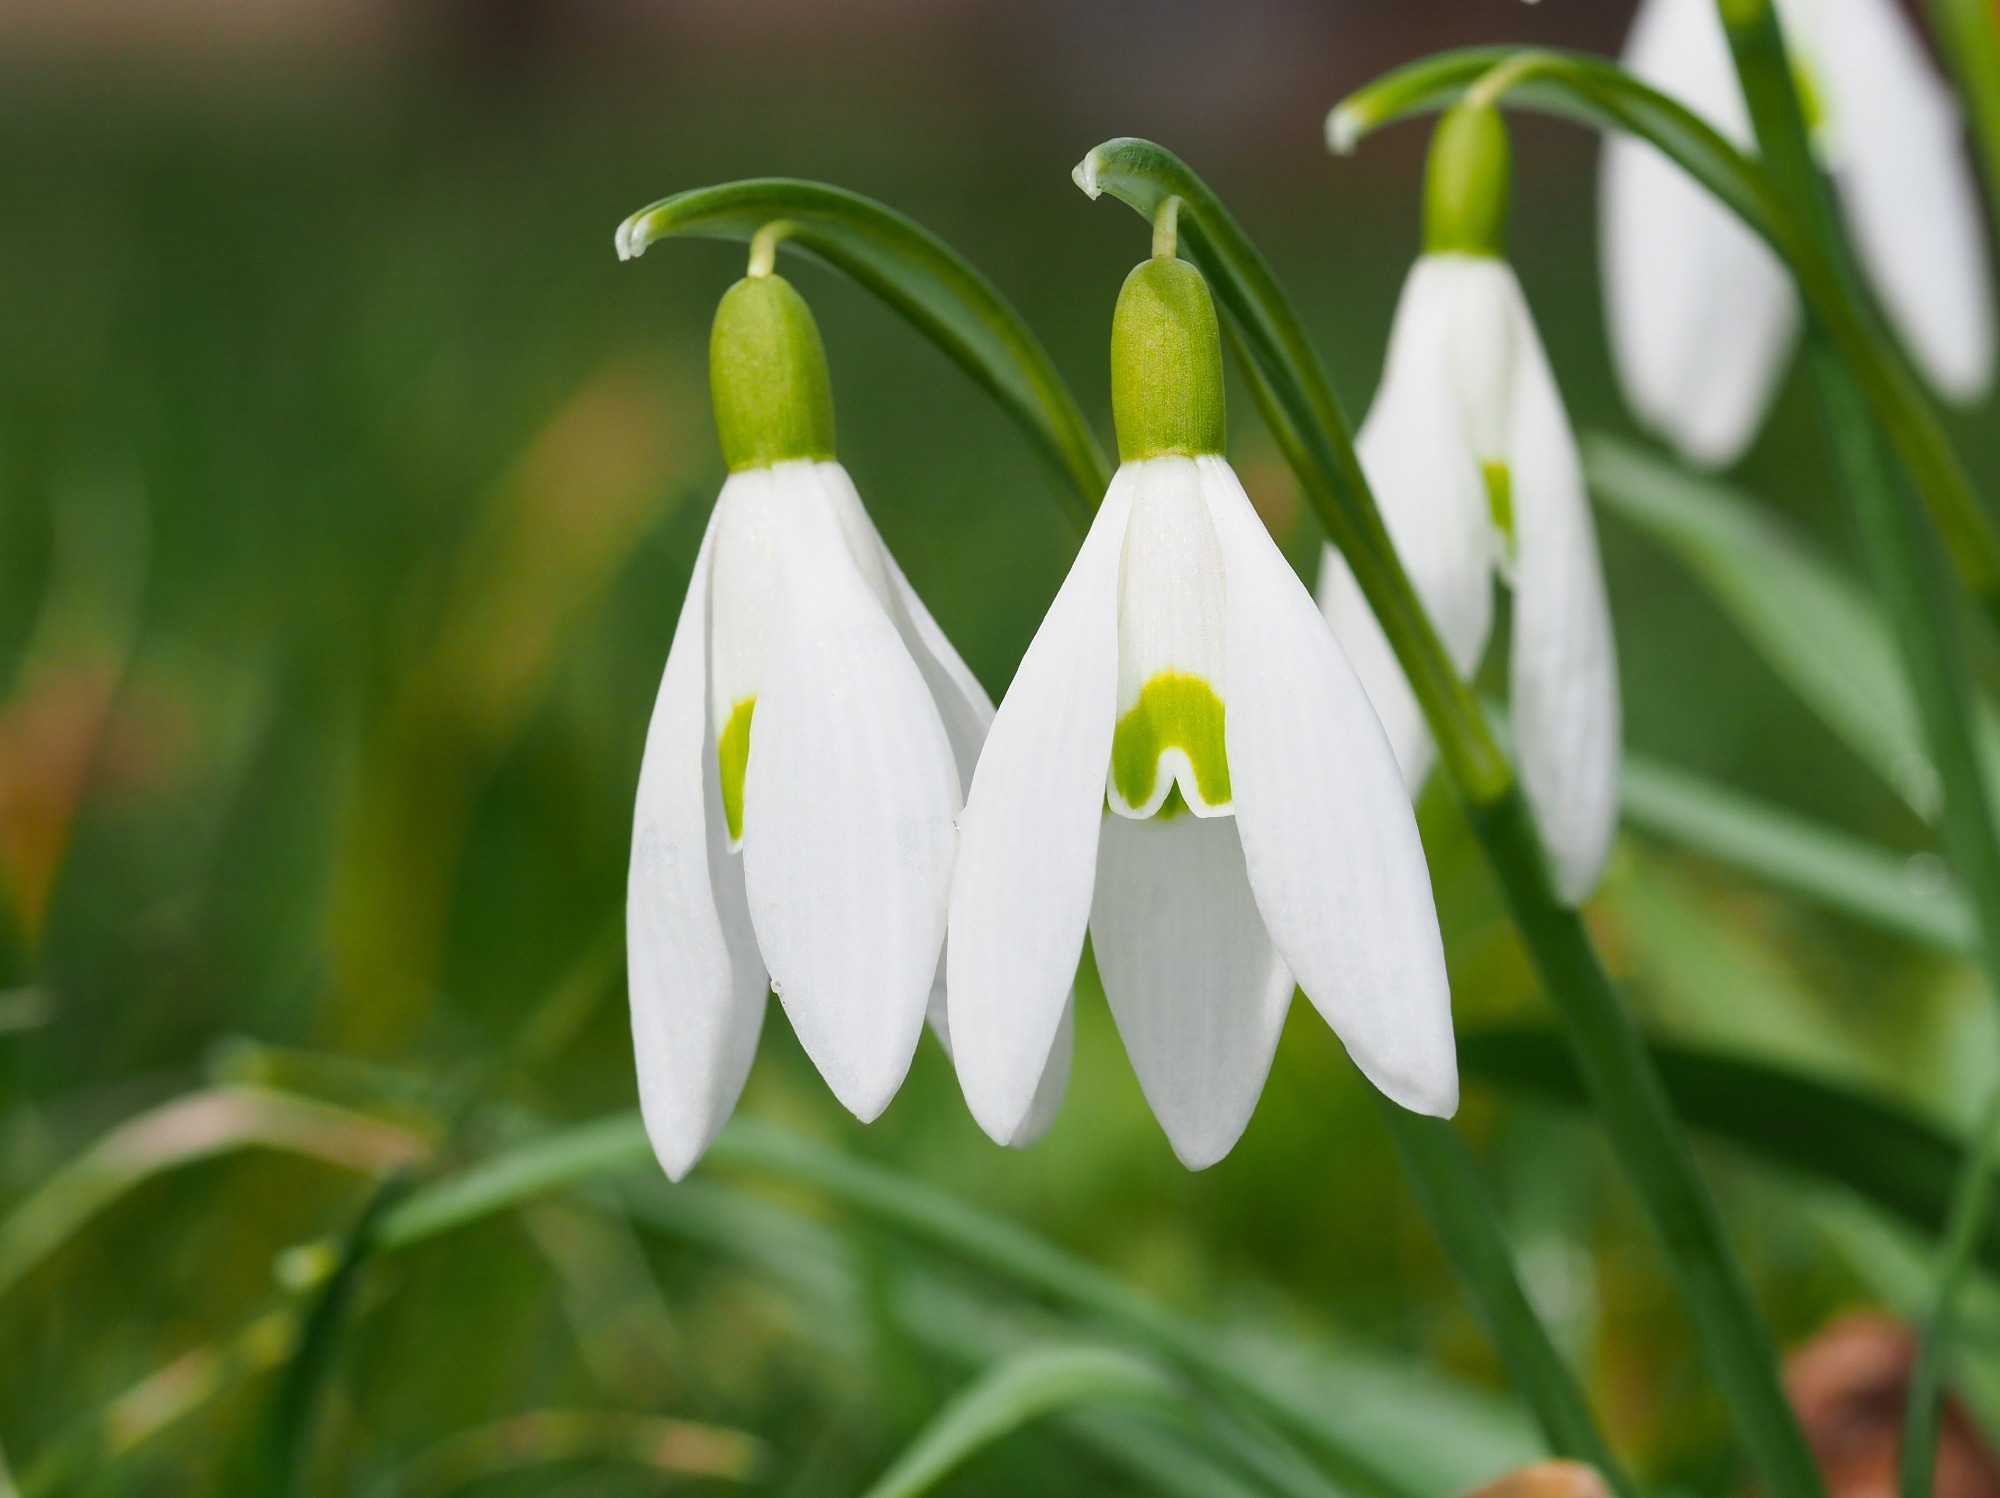 Study: Removal of clinically relevant SARS-CoV-2 variants by an affinity resin containing Galanthus nivalis agglutinin. Image Credit: LifeCollectionPhotography / Shutterstock